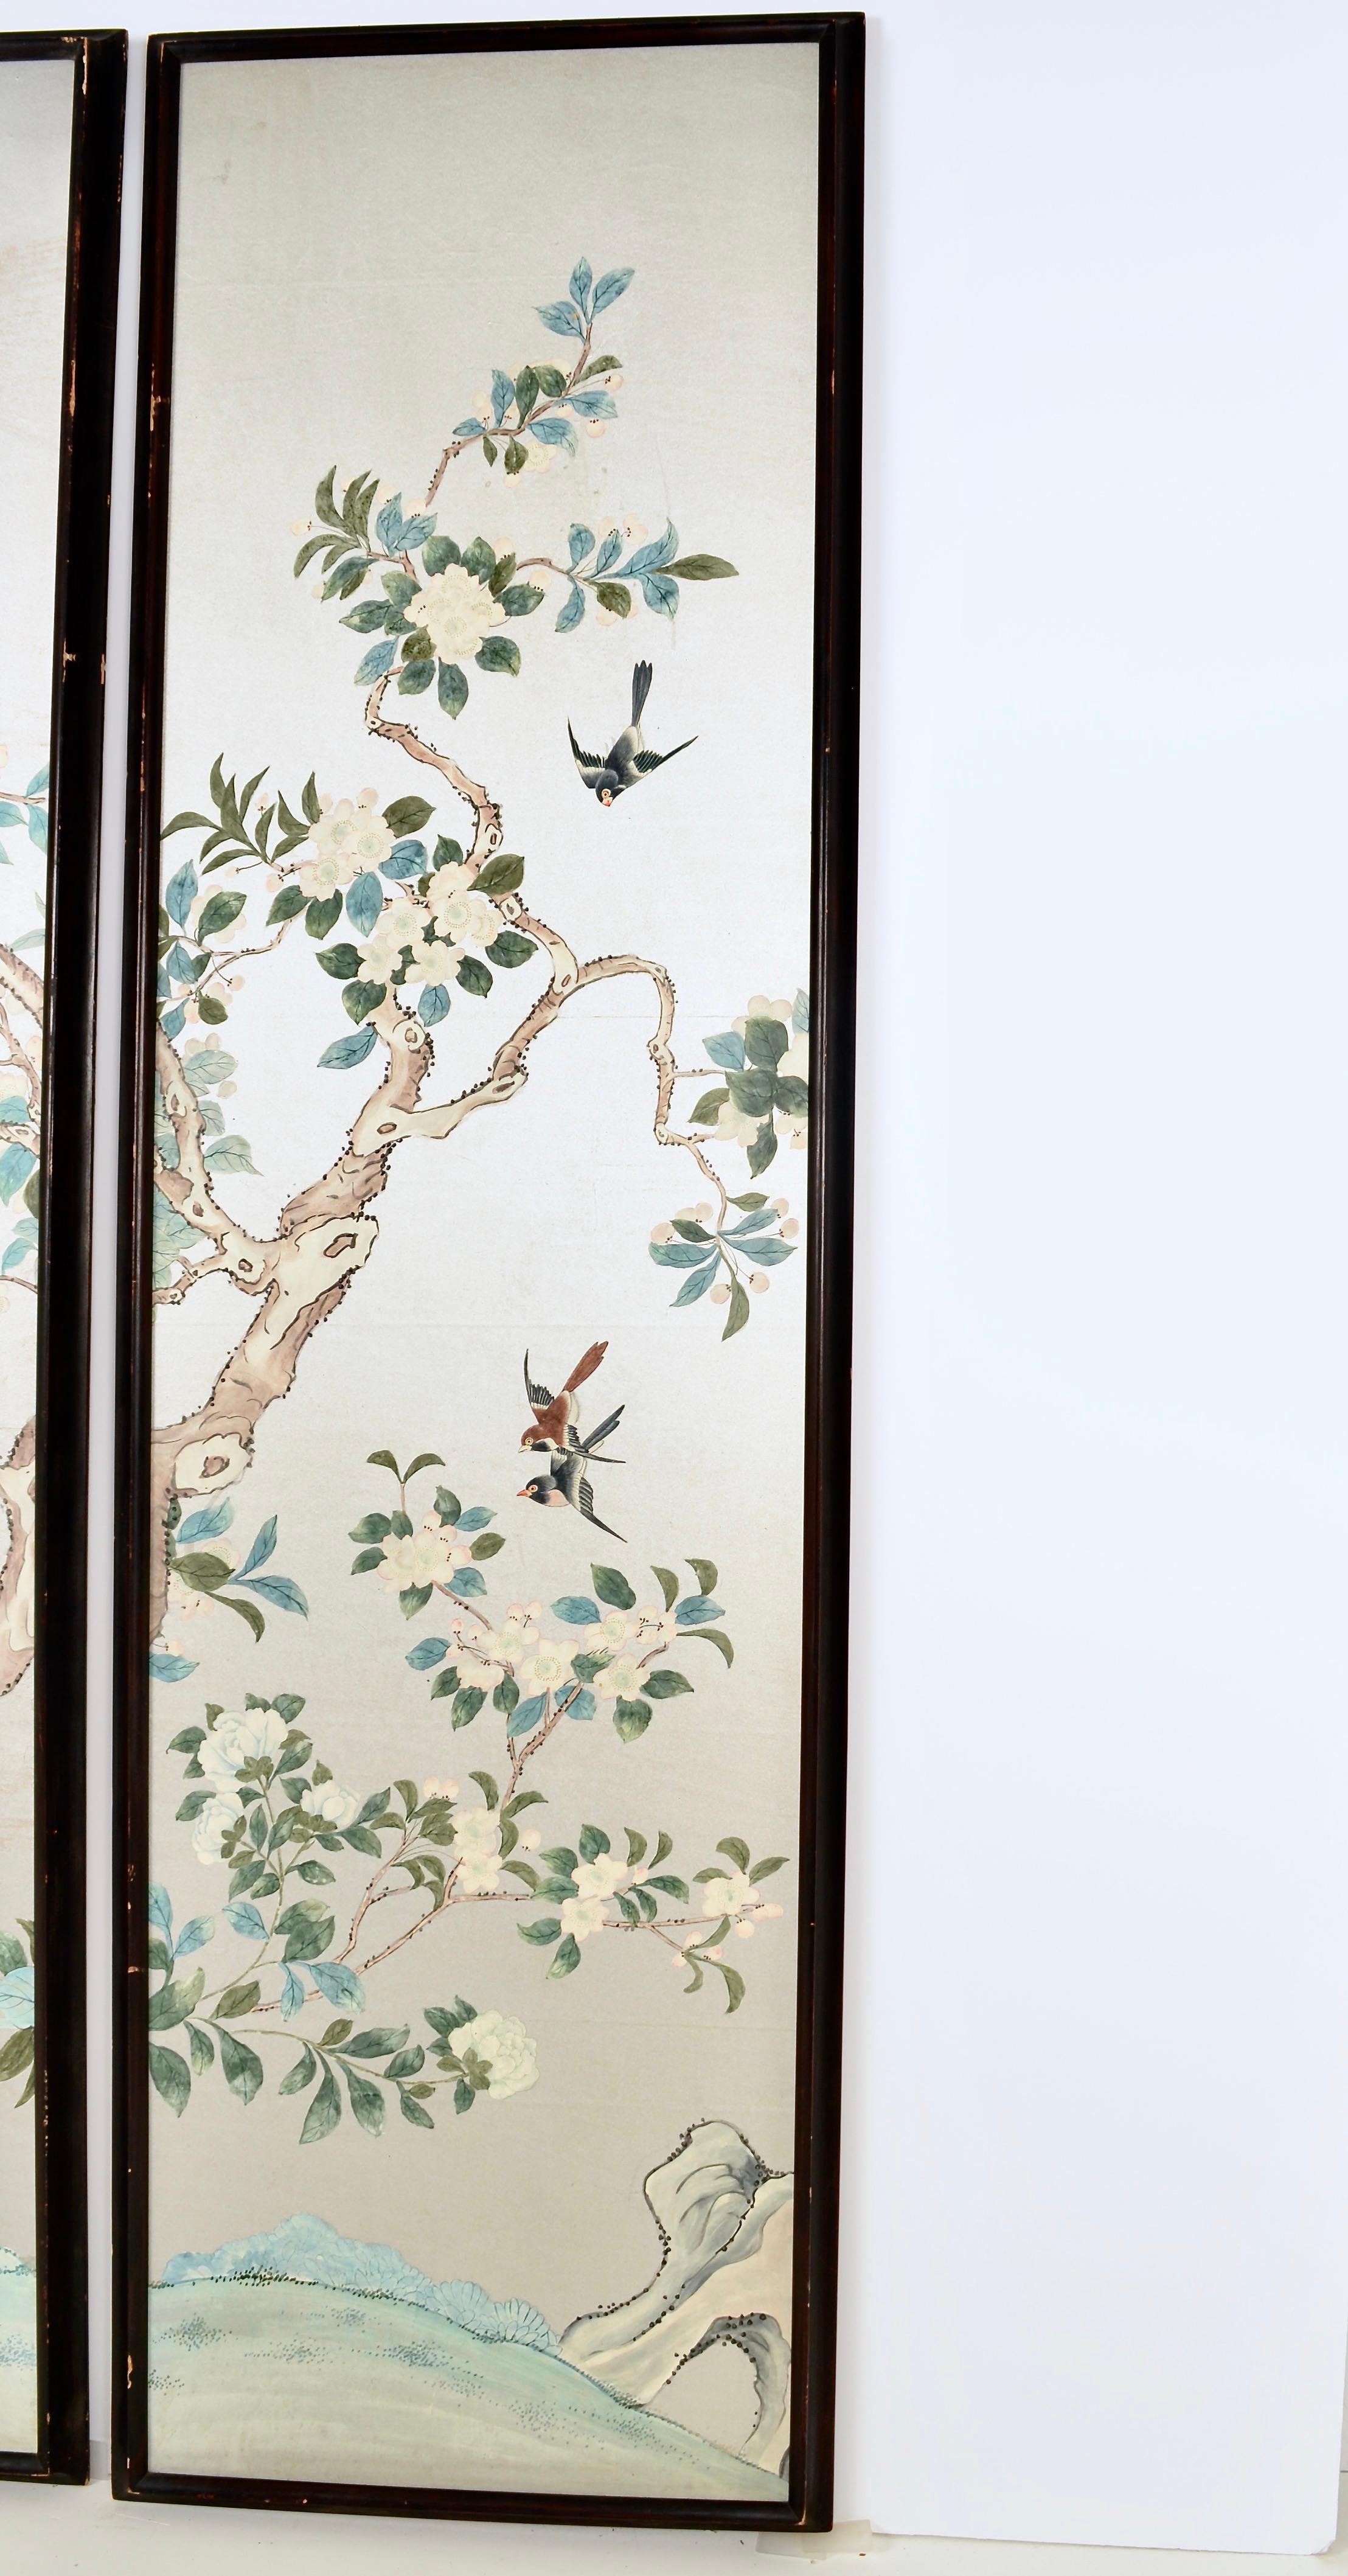 A set of three hand painted silver wallpaper panels, individually framed. The hand painting is lovely and expertly executed, featuring a classical Chinese motif of birds and flowers. Color remains vibrant and clear. The frames are original with an